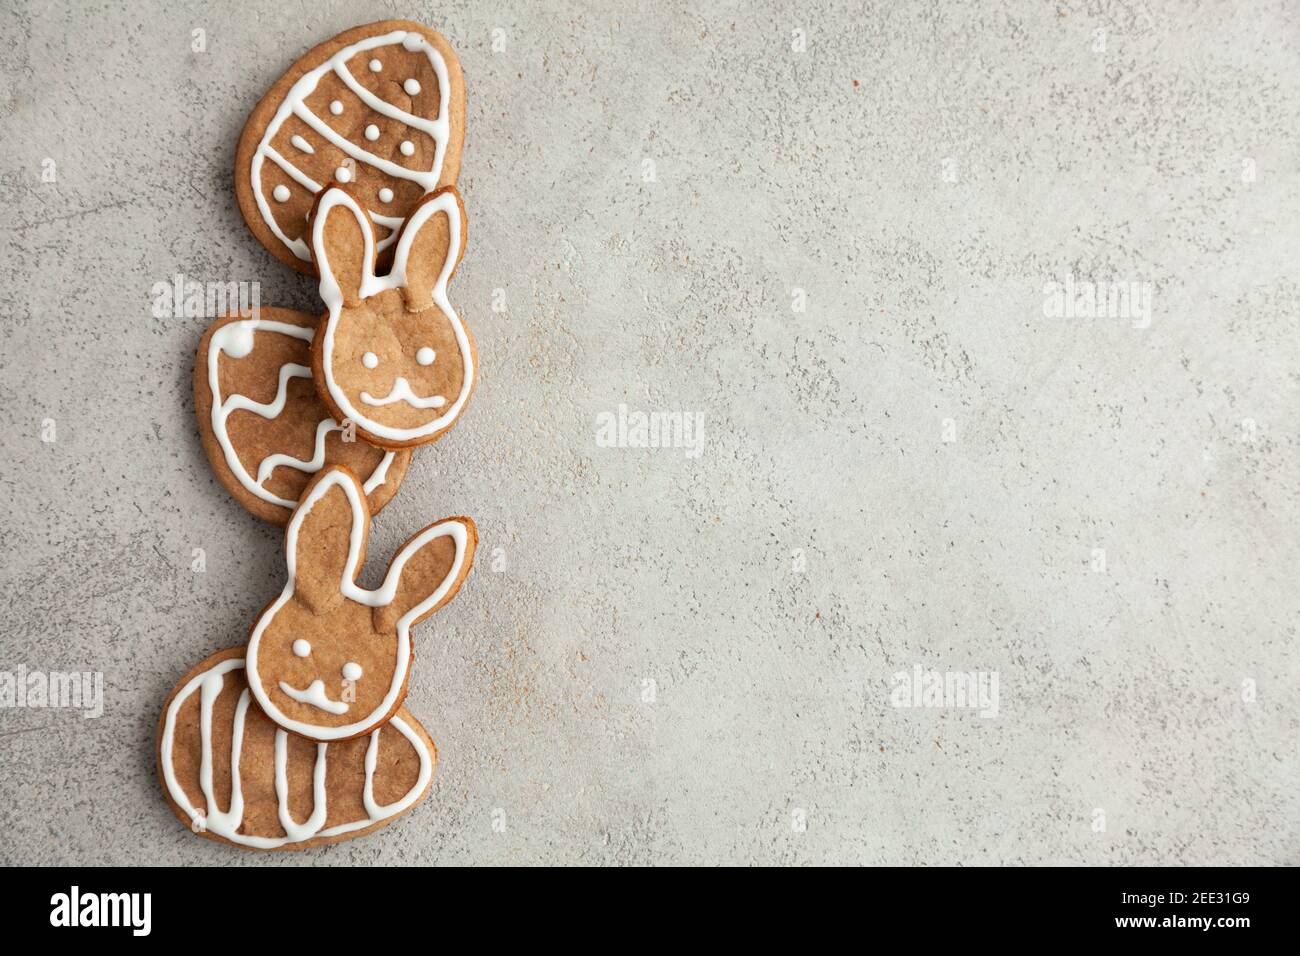 Easter decorated cookies in the shape of a bunny and eggs are laid out in a row on a gray background. Top view Stock Photo